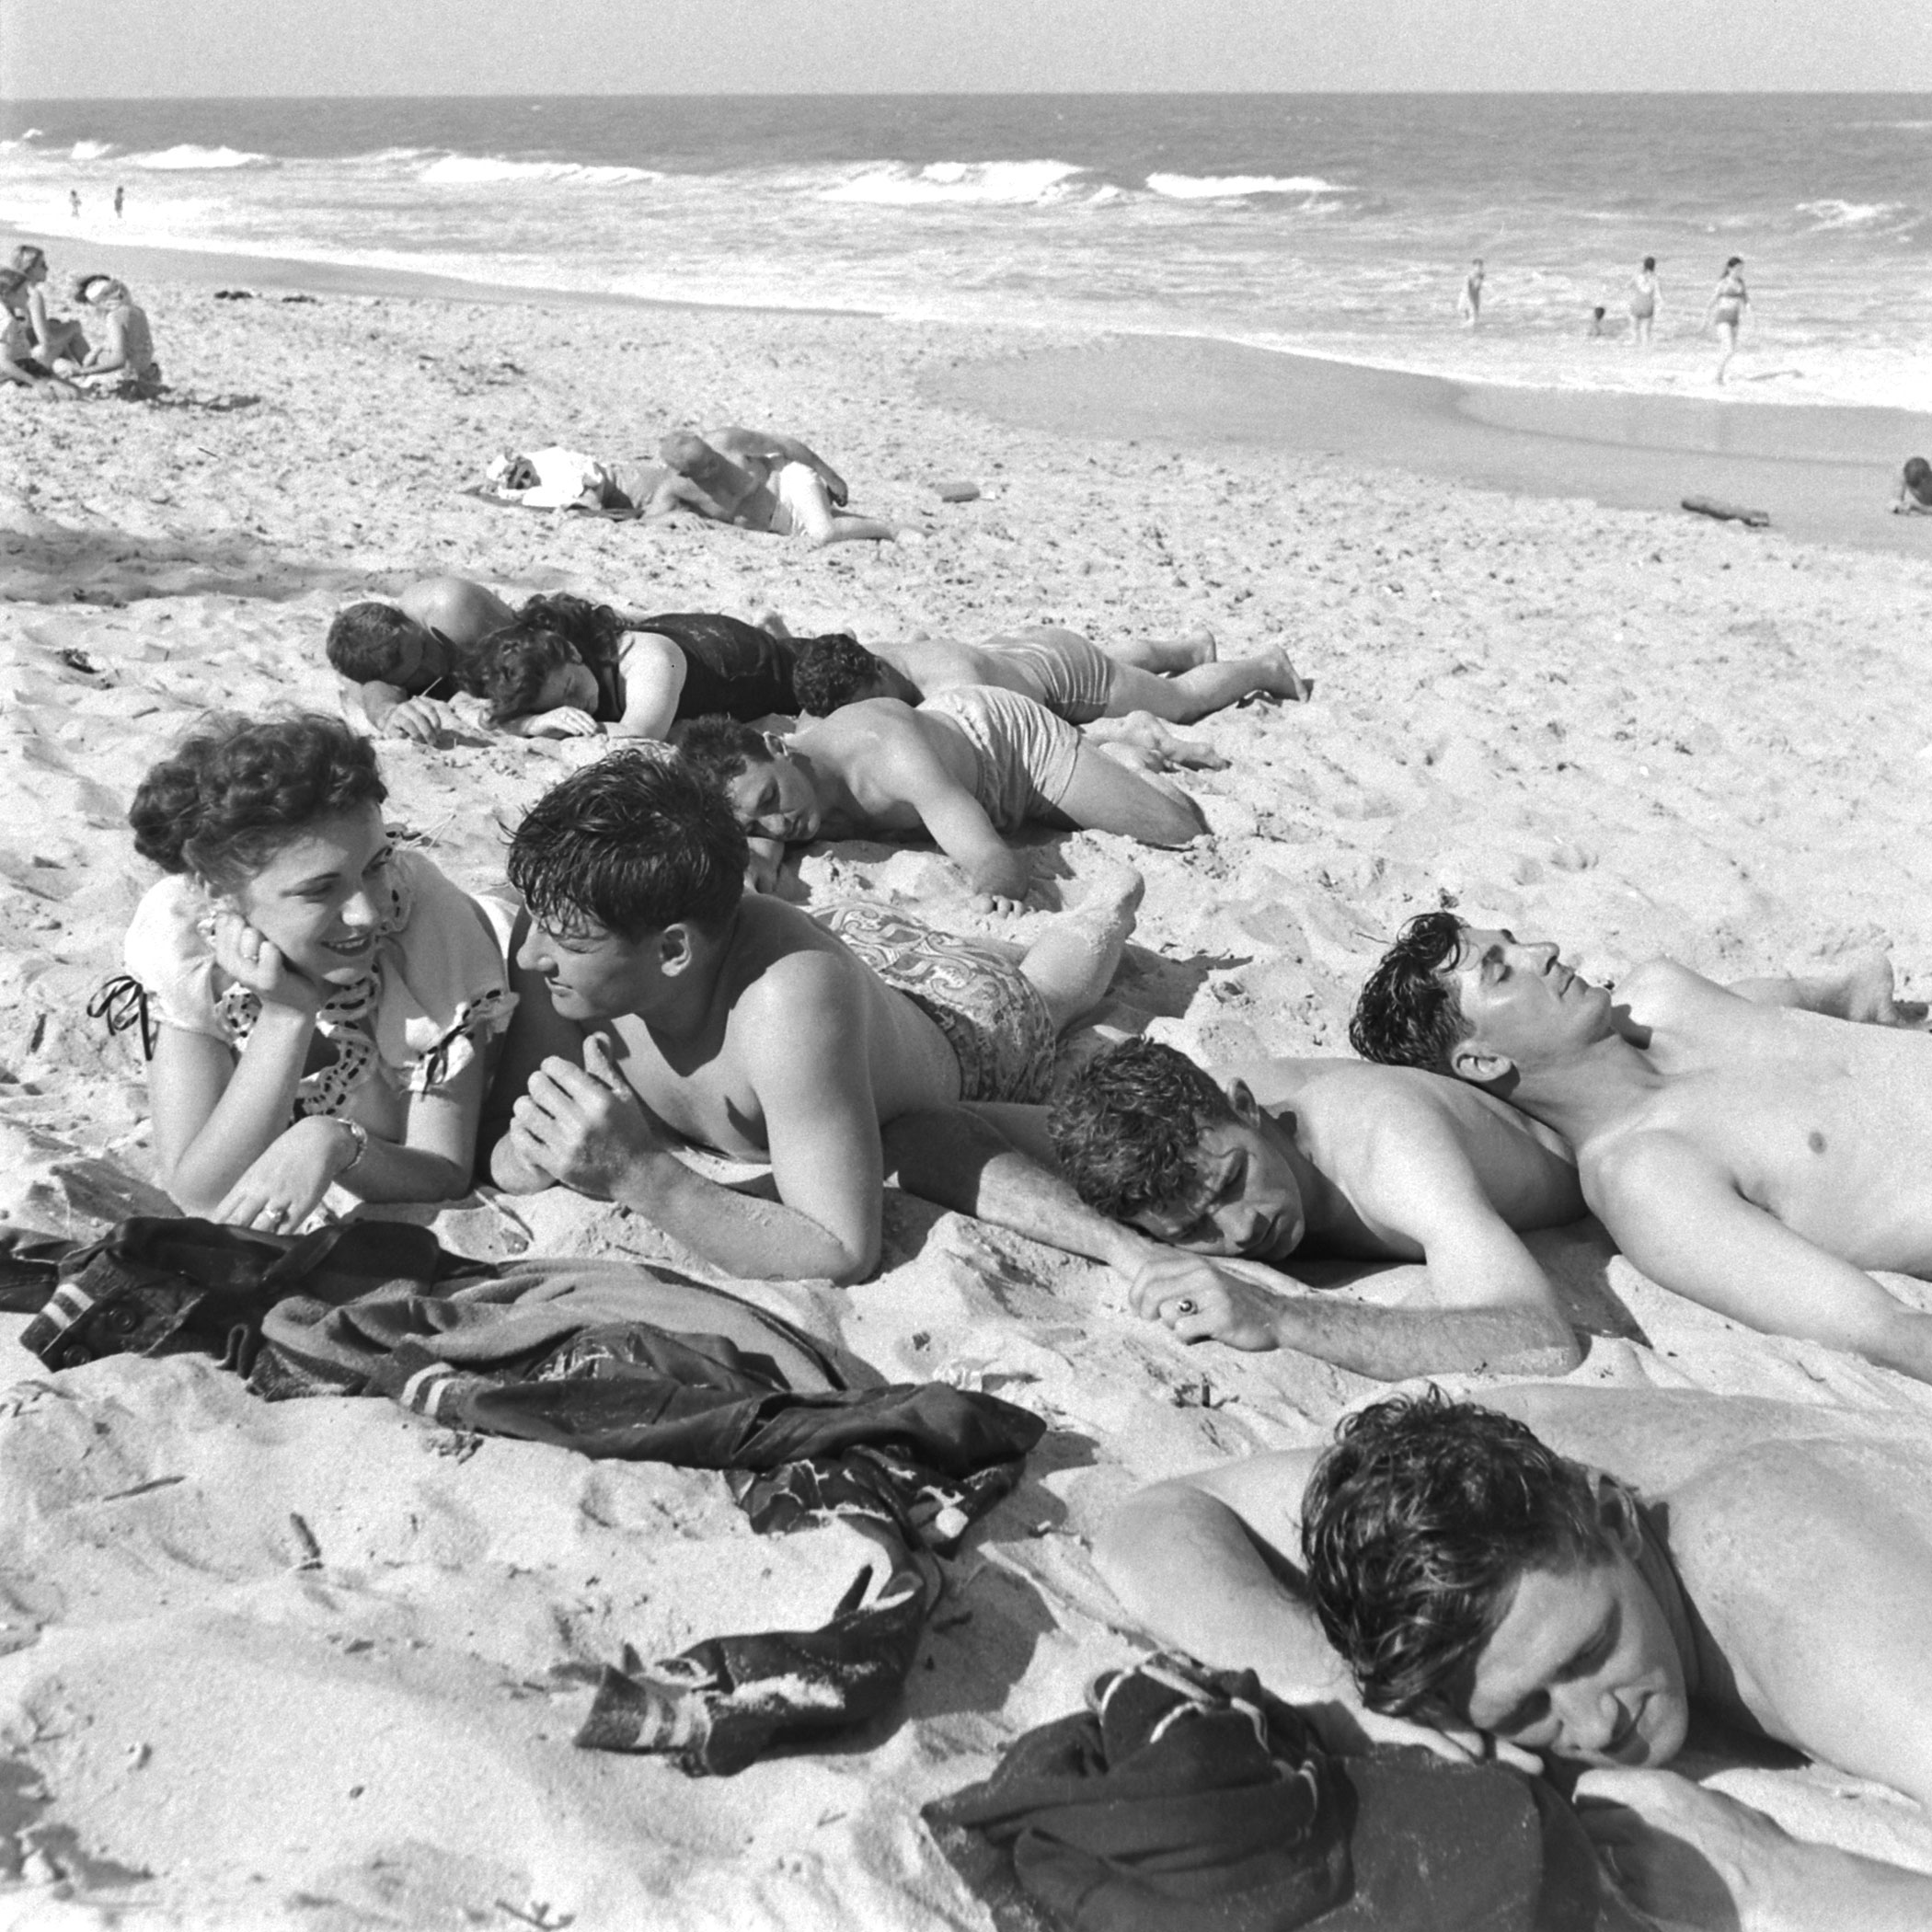 Brooklyn Dodgers and young women relax on the beach during spring training at Dodgertown, Vero Beach, Fla., 1948.